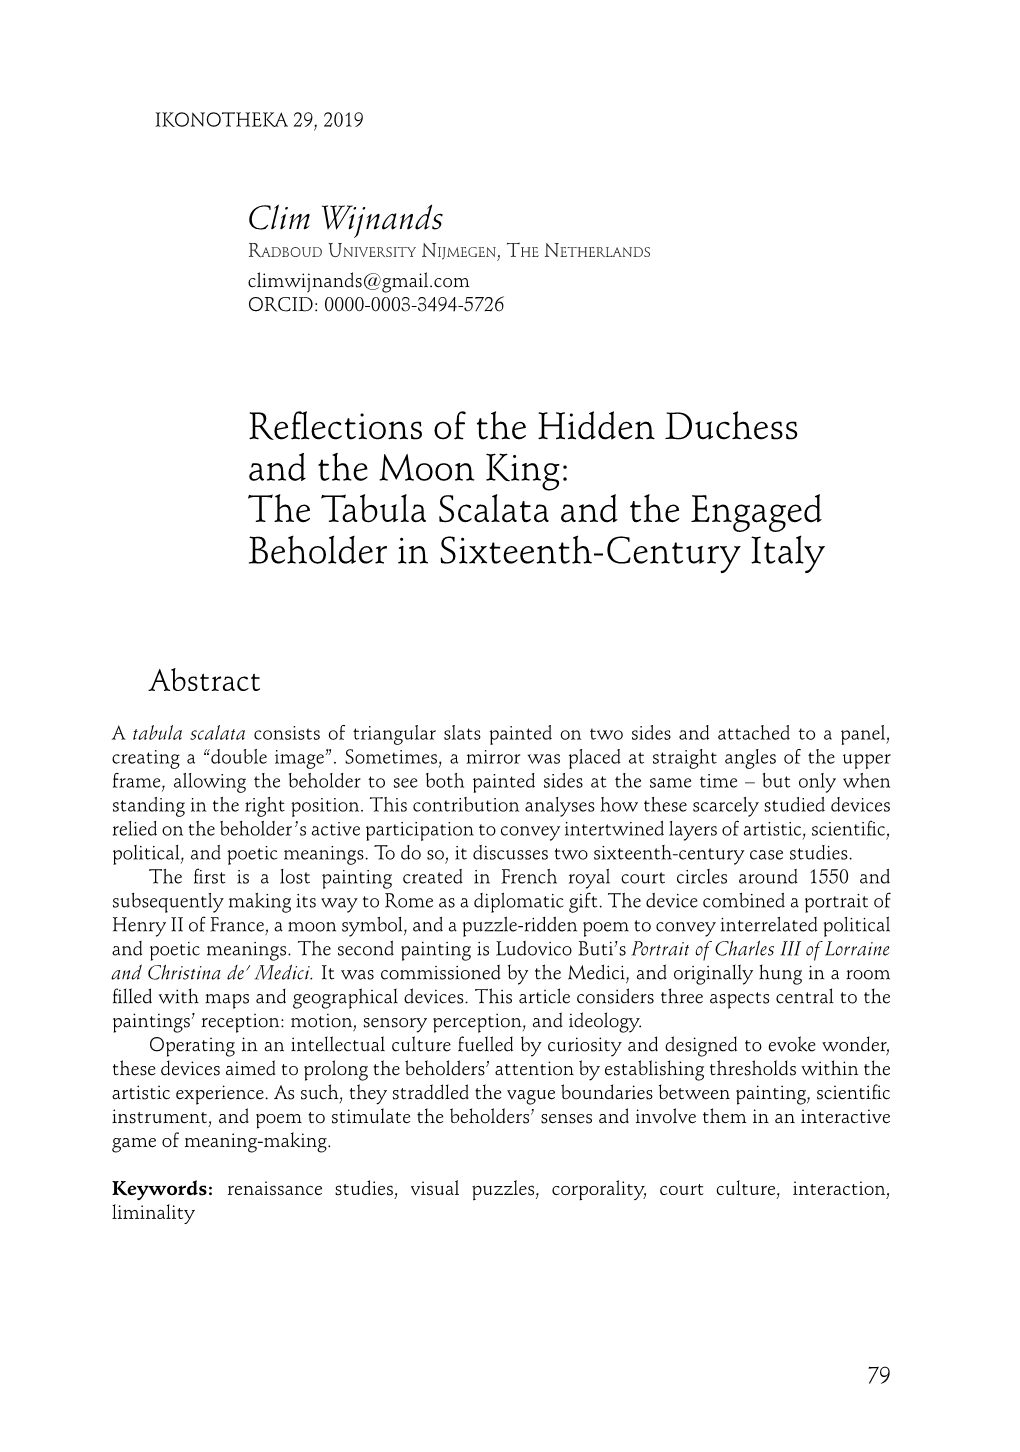 The Tabula Scalata and the Engaged Beholder in Sixteenth-Century Italy